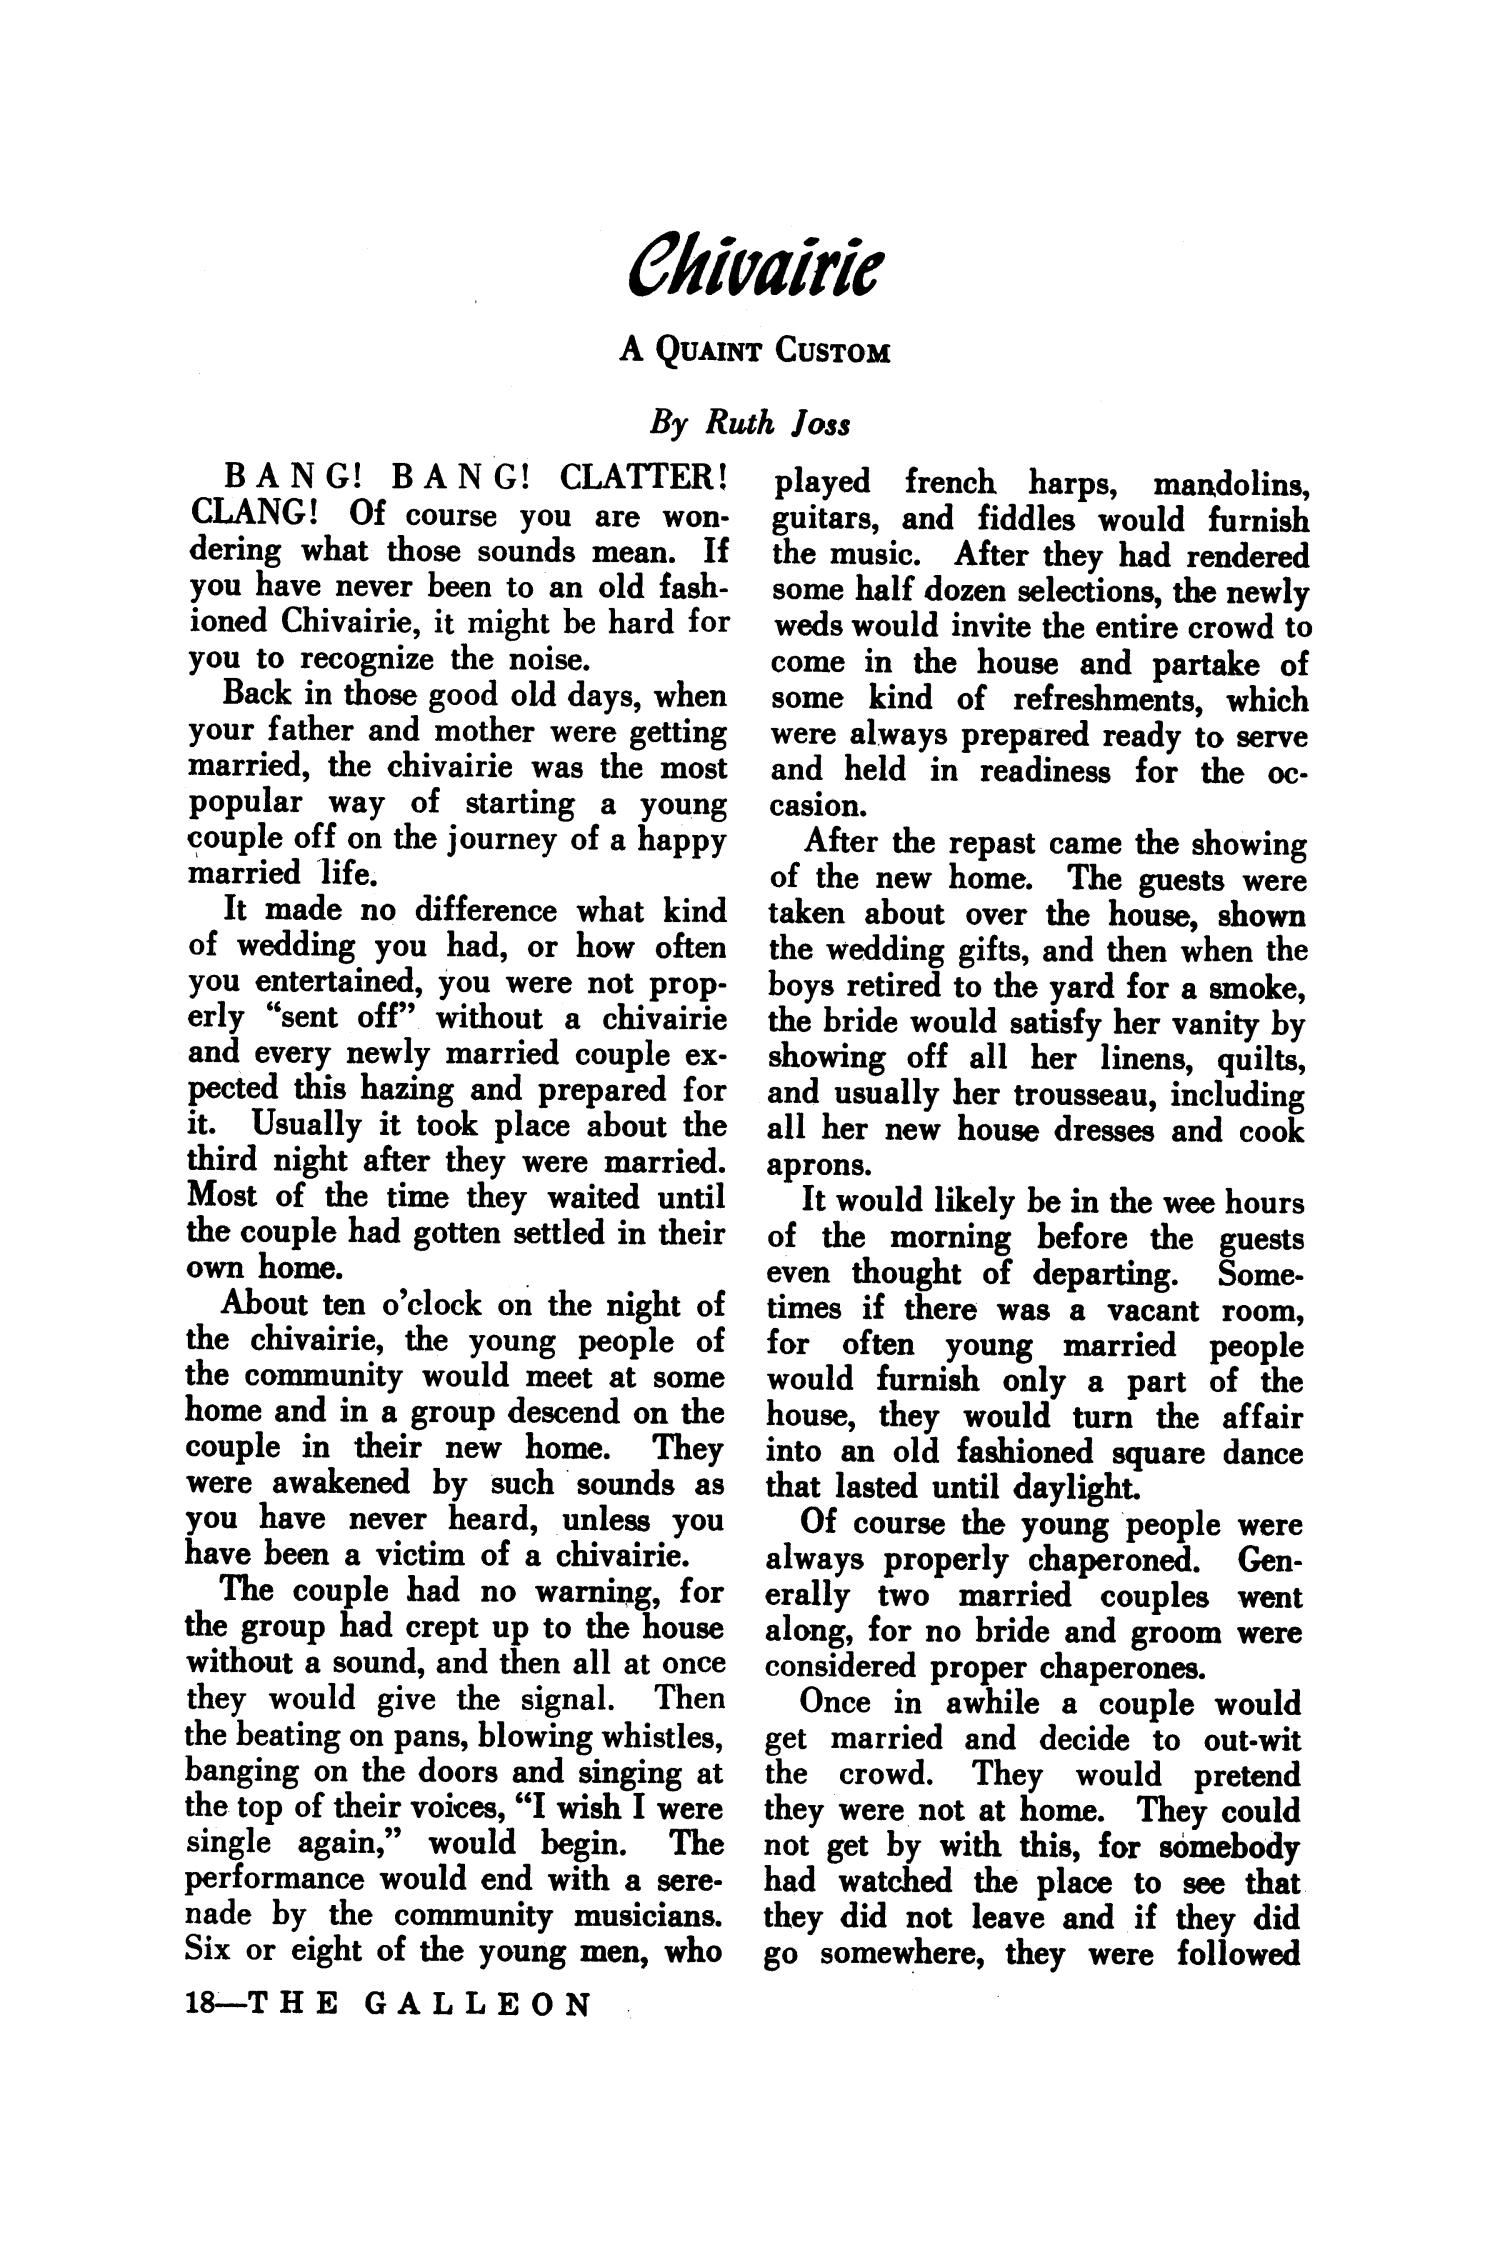 The Galleon, Volume 18, Number 2, March 1942
                                                
                                                    18
                                                